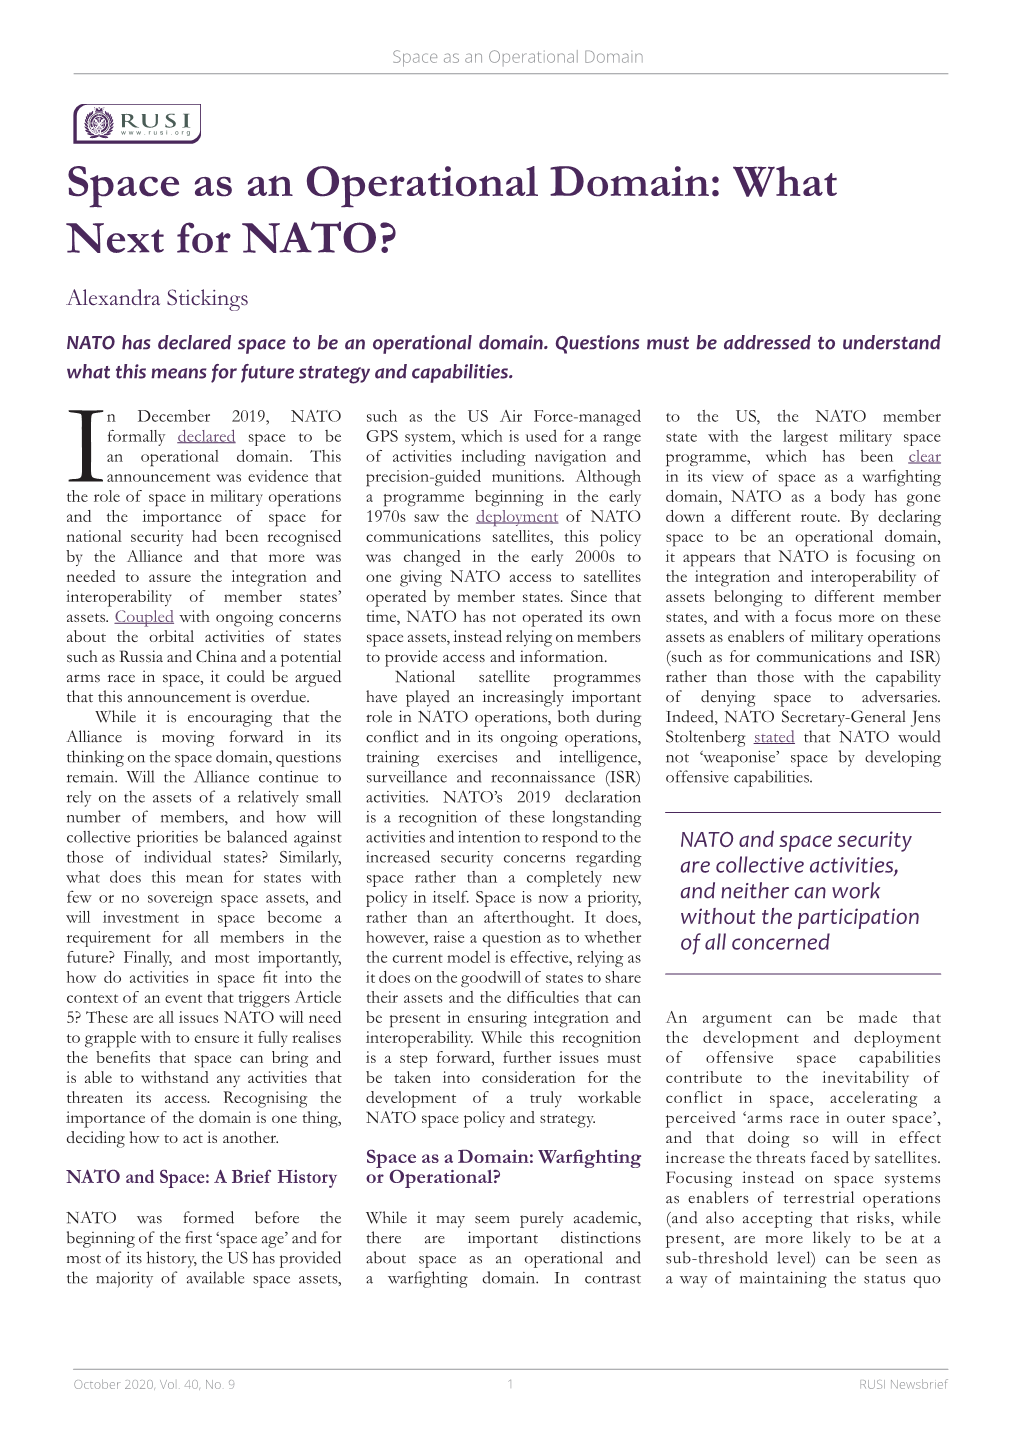 Space As an Operational Domain: What Next for NATO? Alexandra Stickings